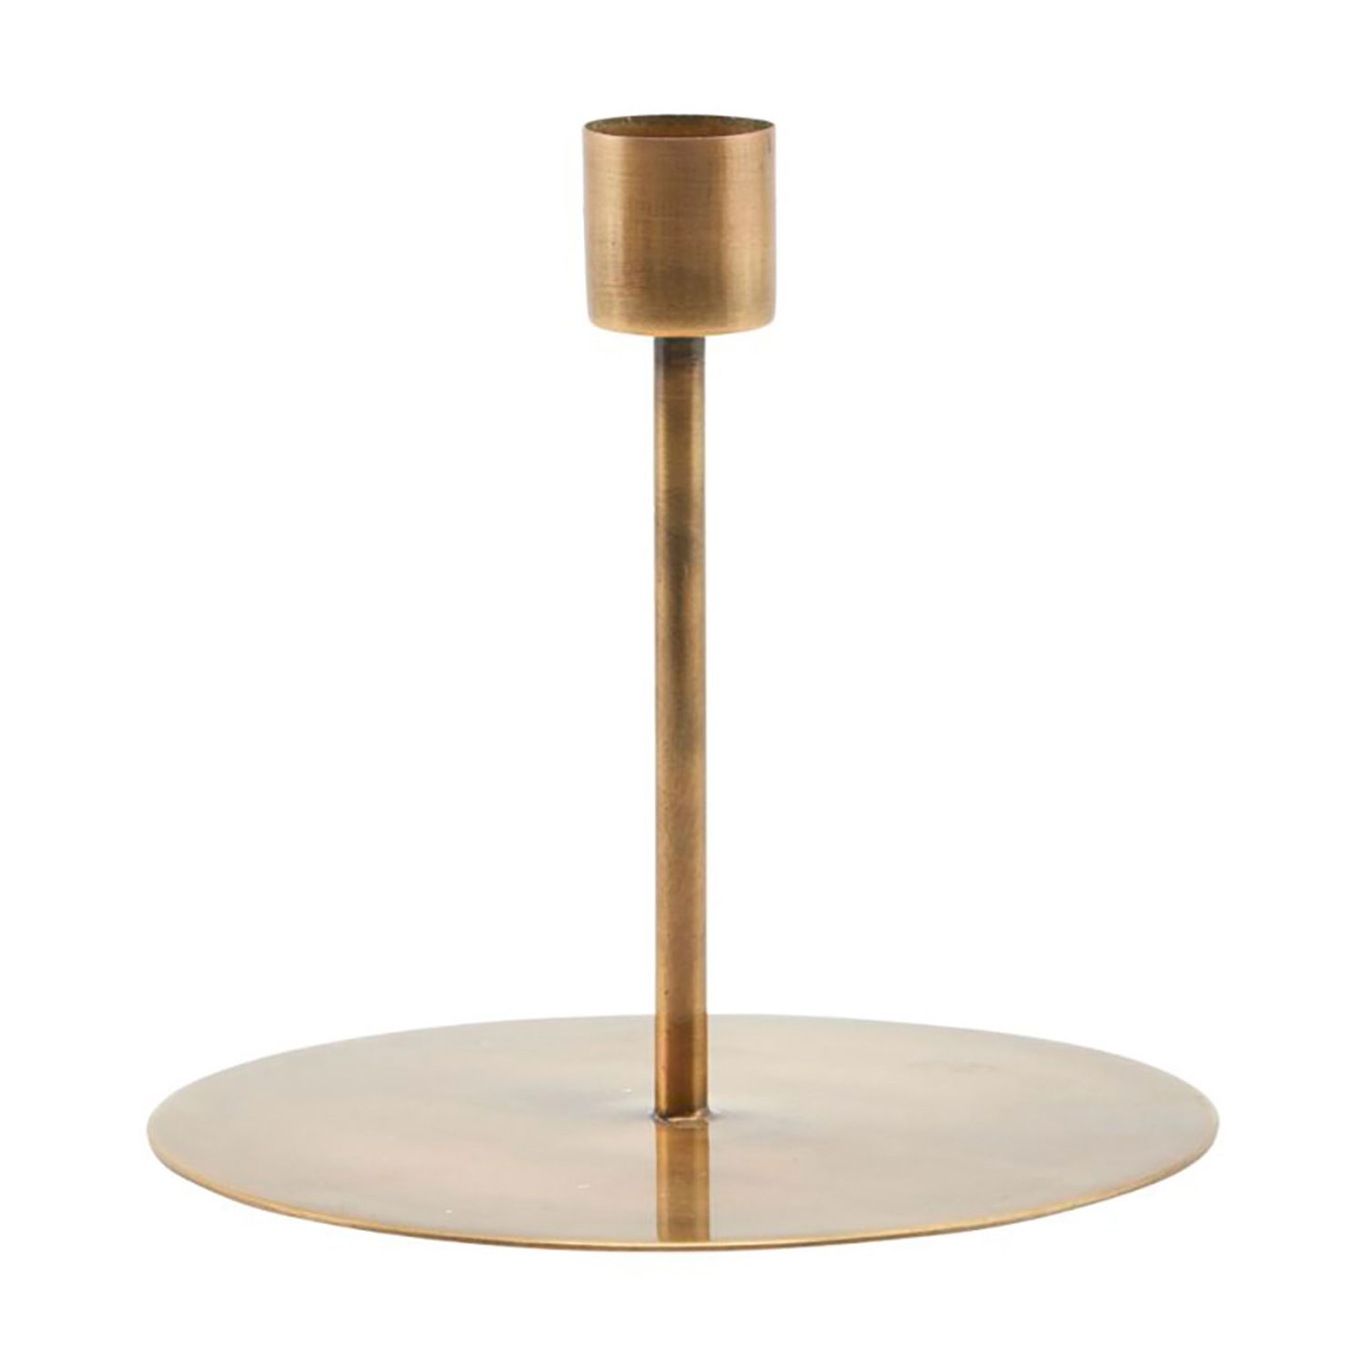 Anit Candle Stand 12 cm, Antique Brass